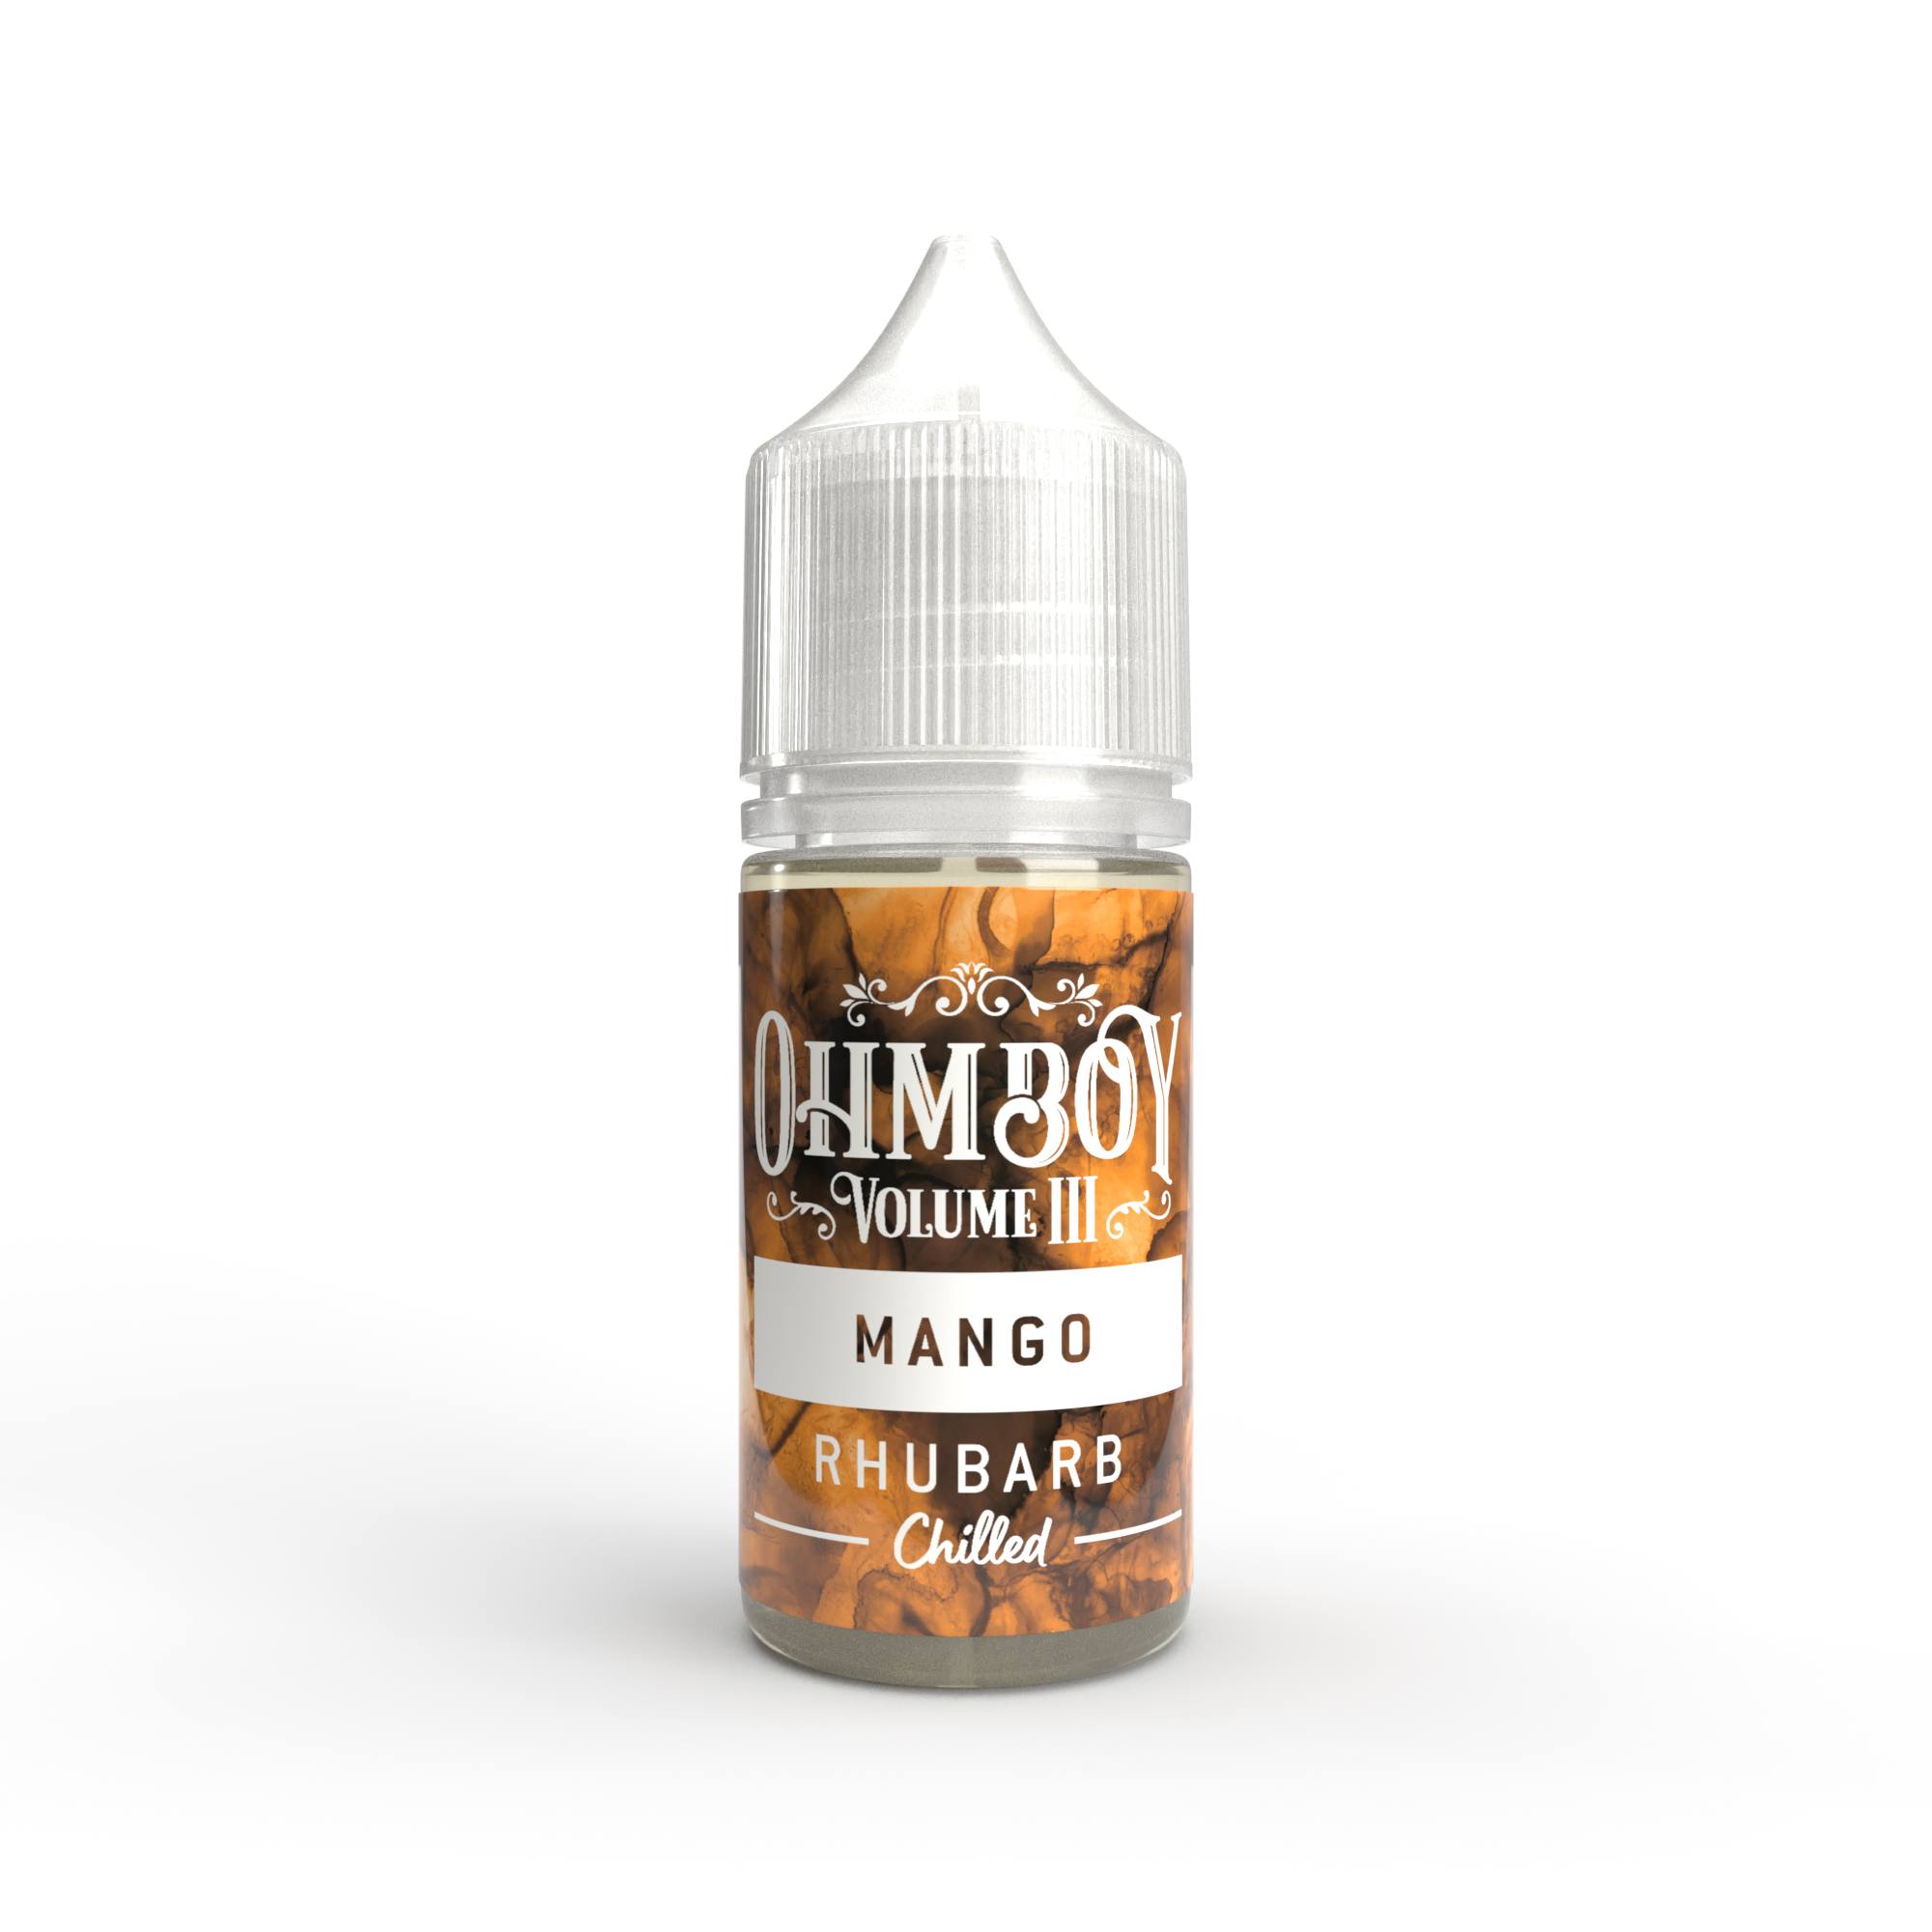 Mango Rhubarb Chilled Flavour Concentrate by Ohm Boy